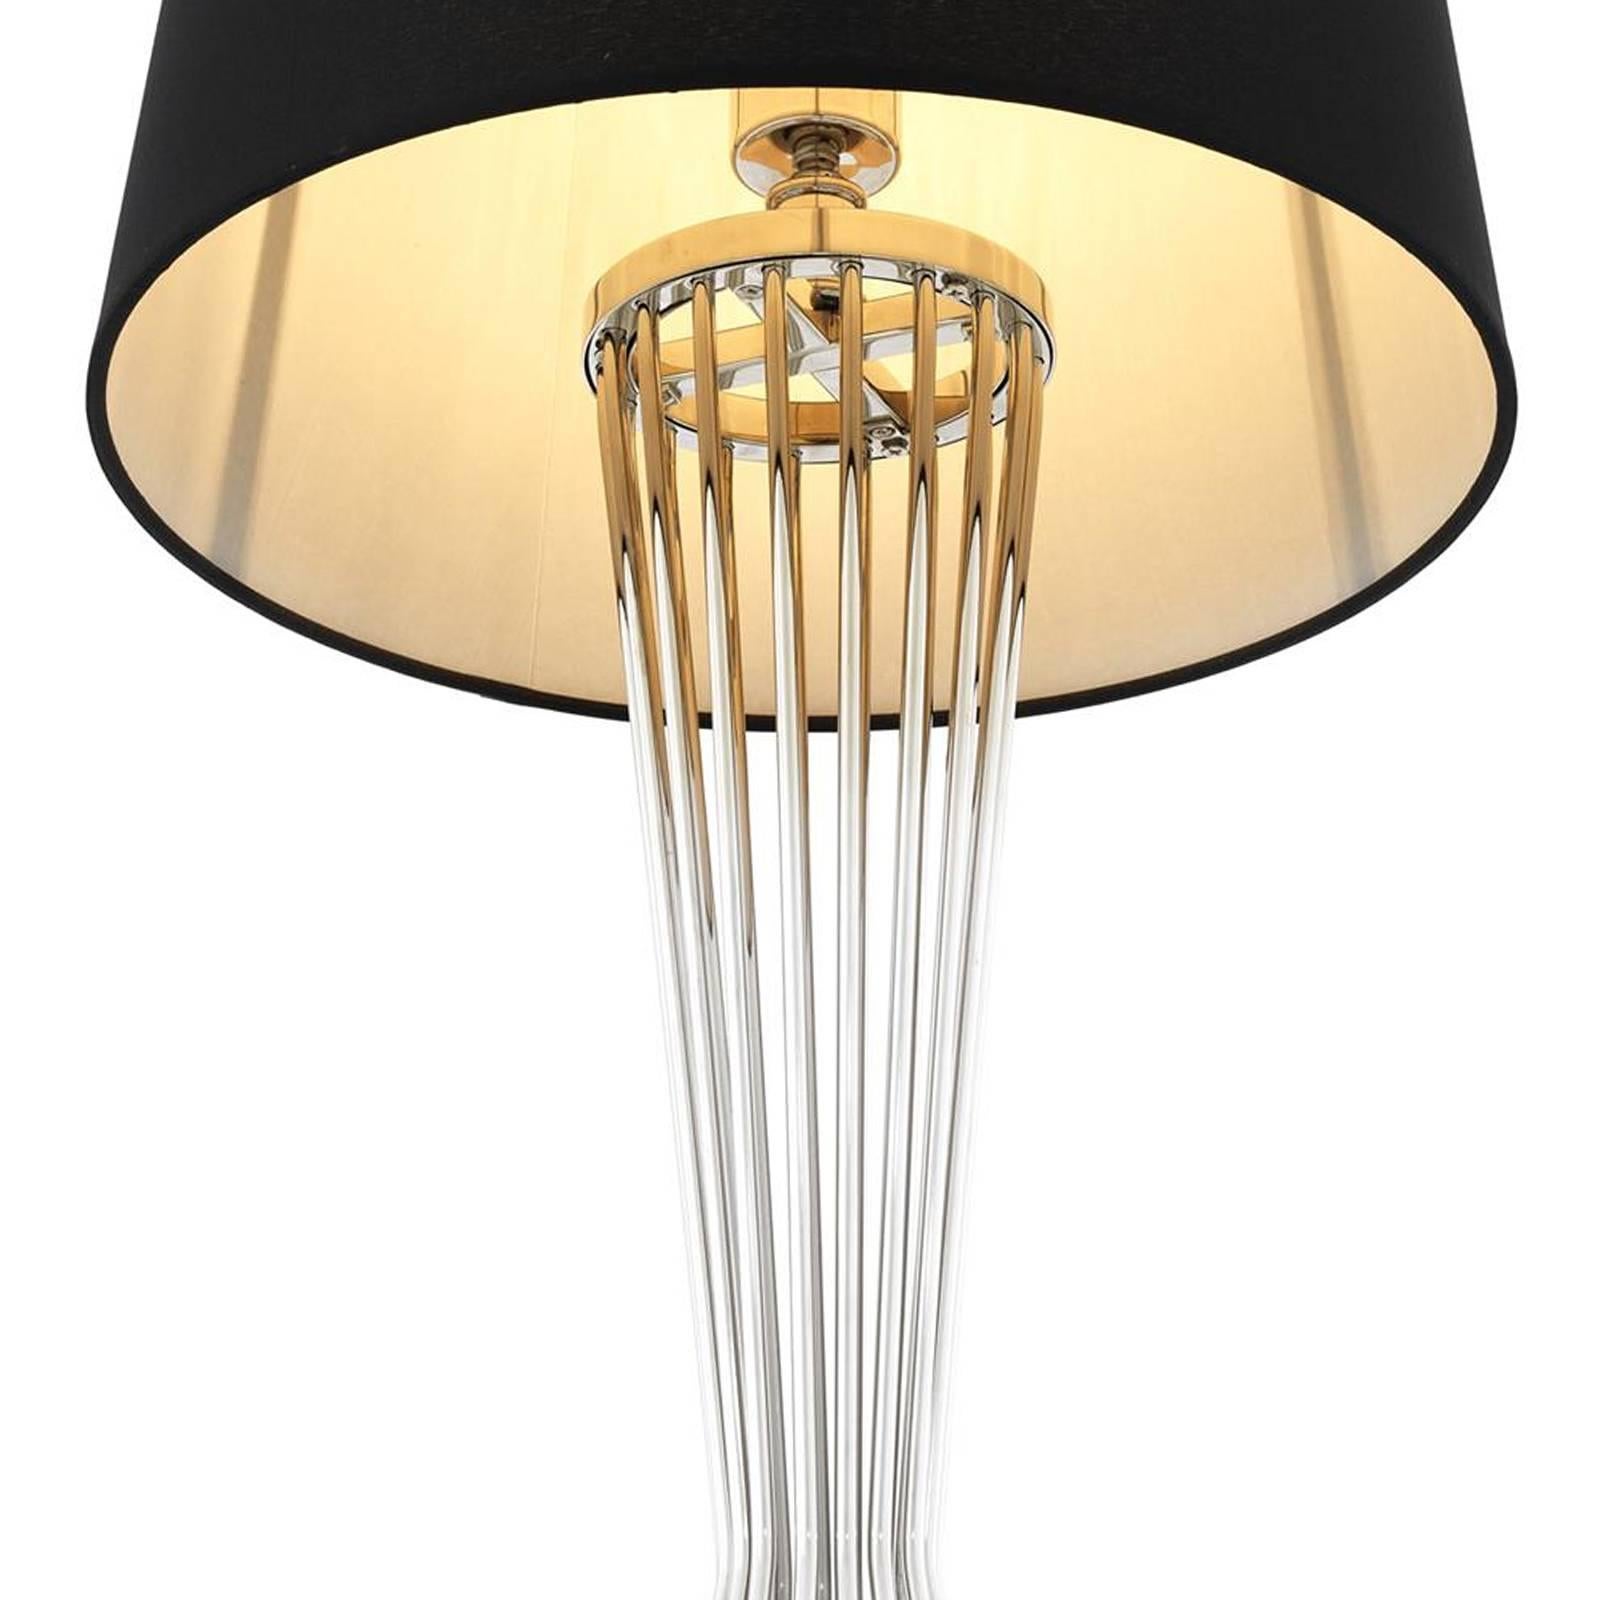 Barnet Table Lamp in Gold or Nickel Finish For Sale 3